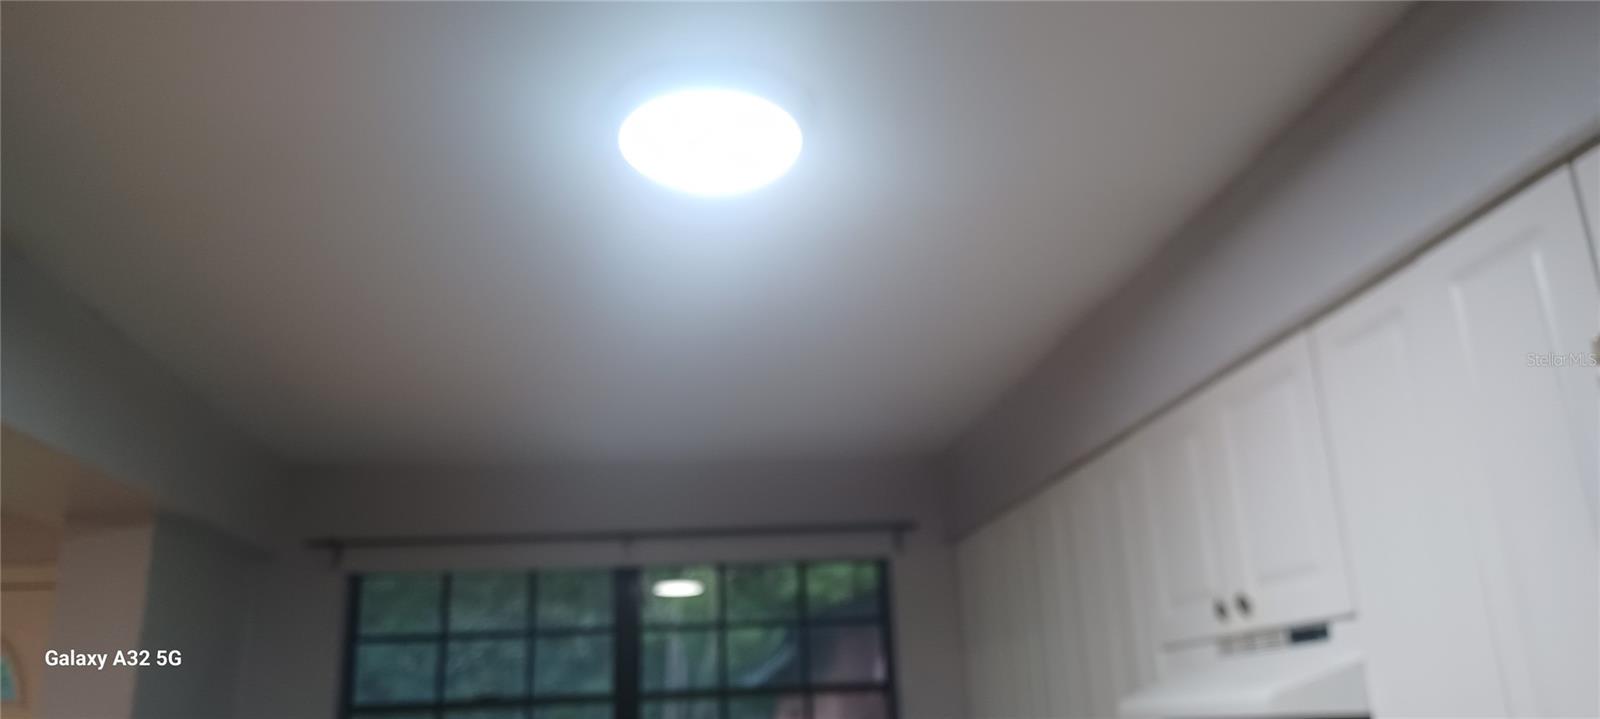 new energy saving lights in kitchen.